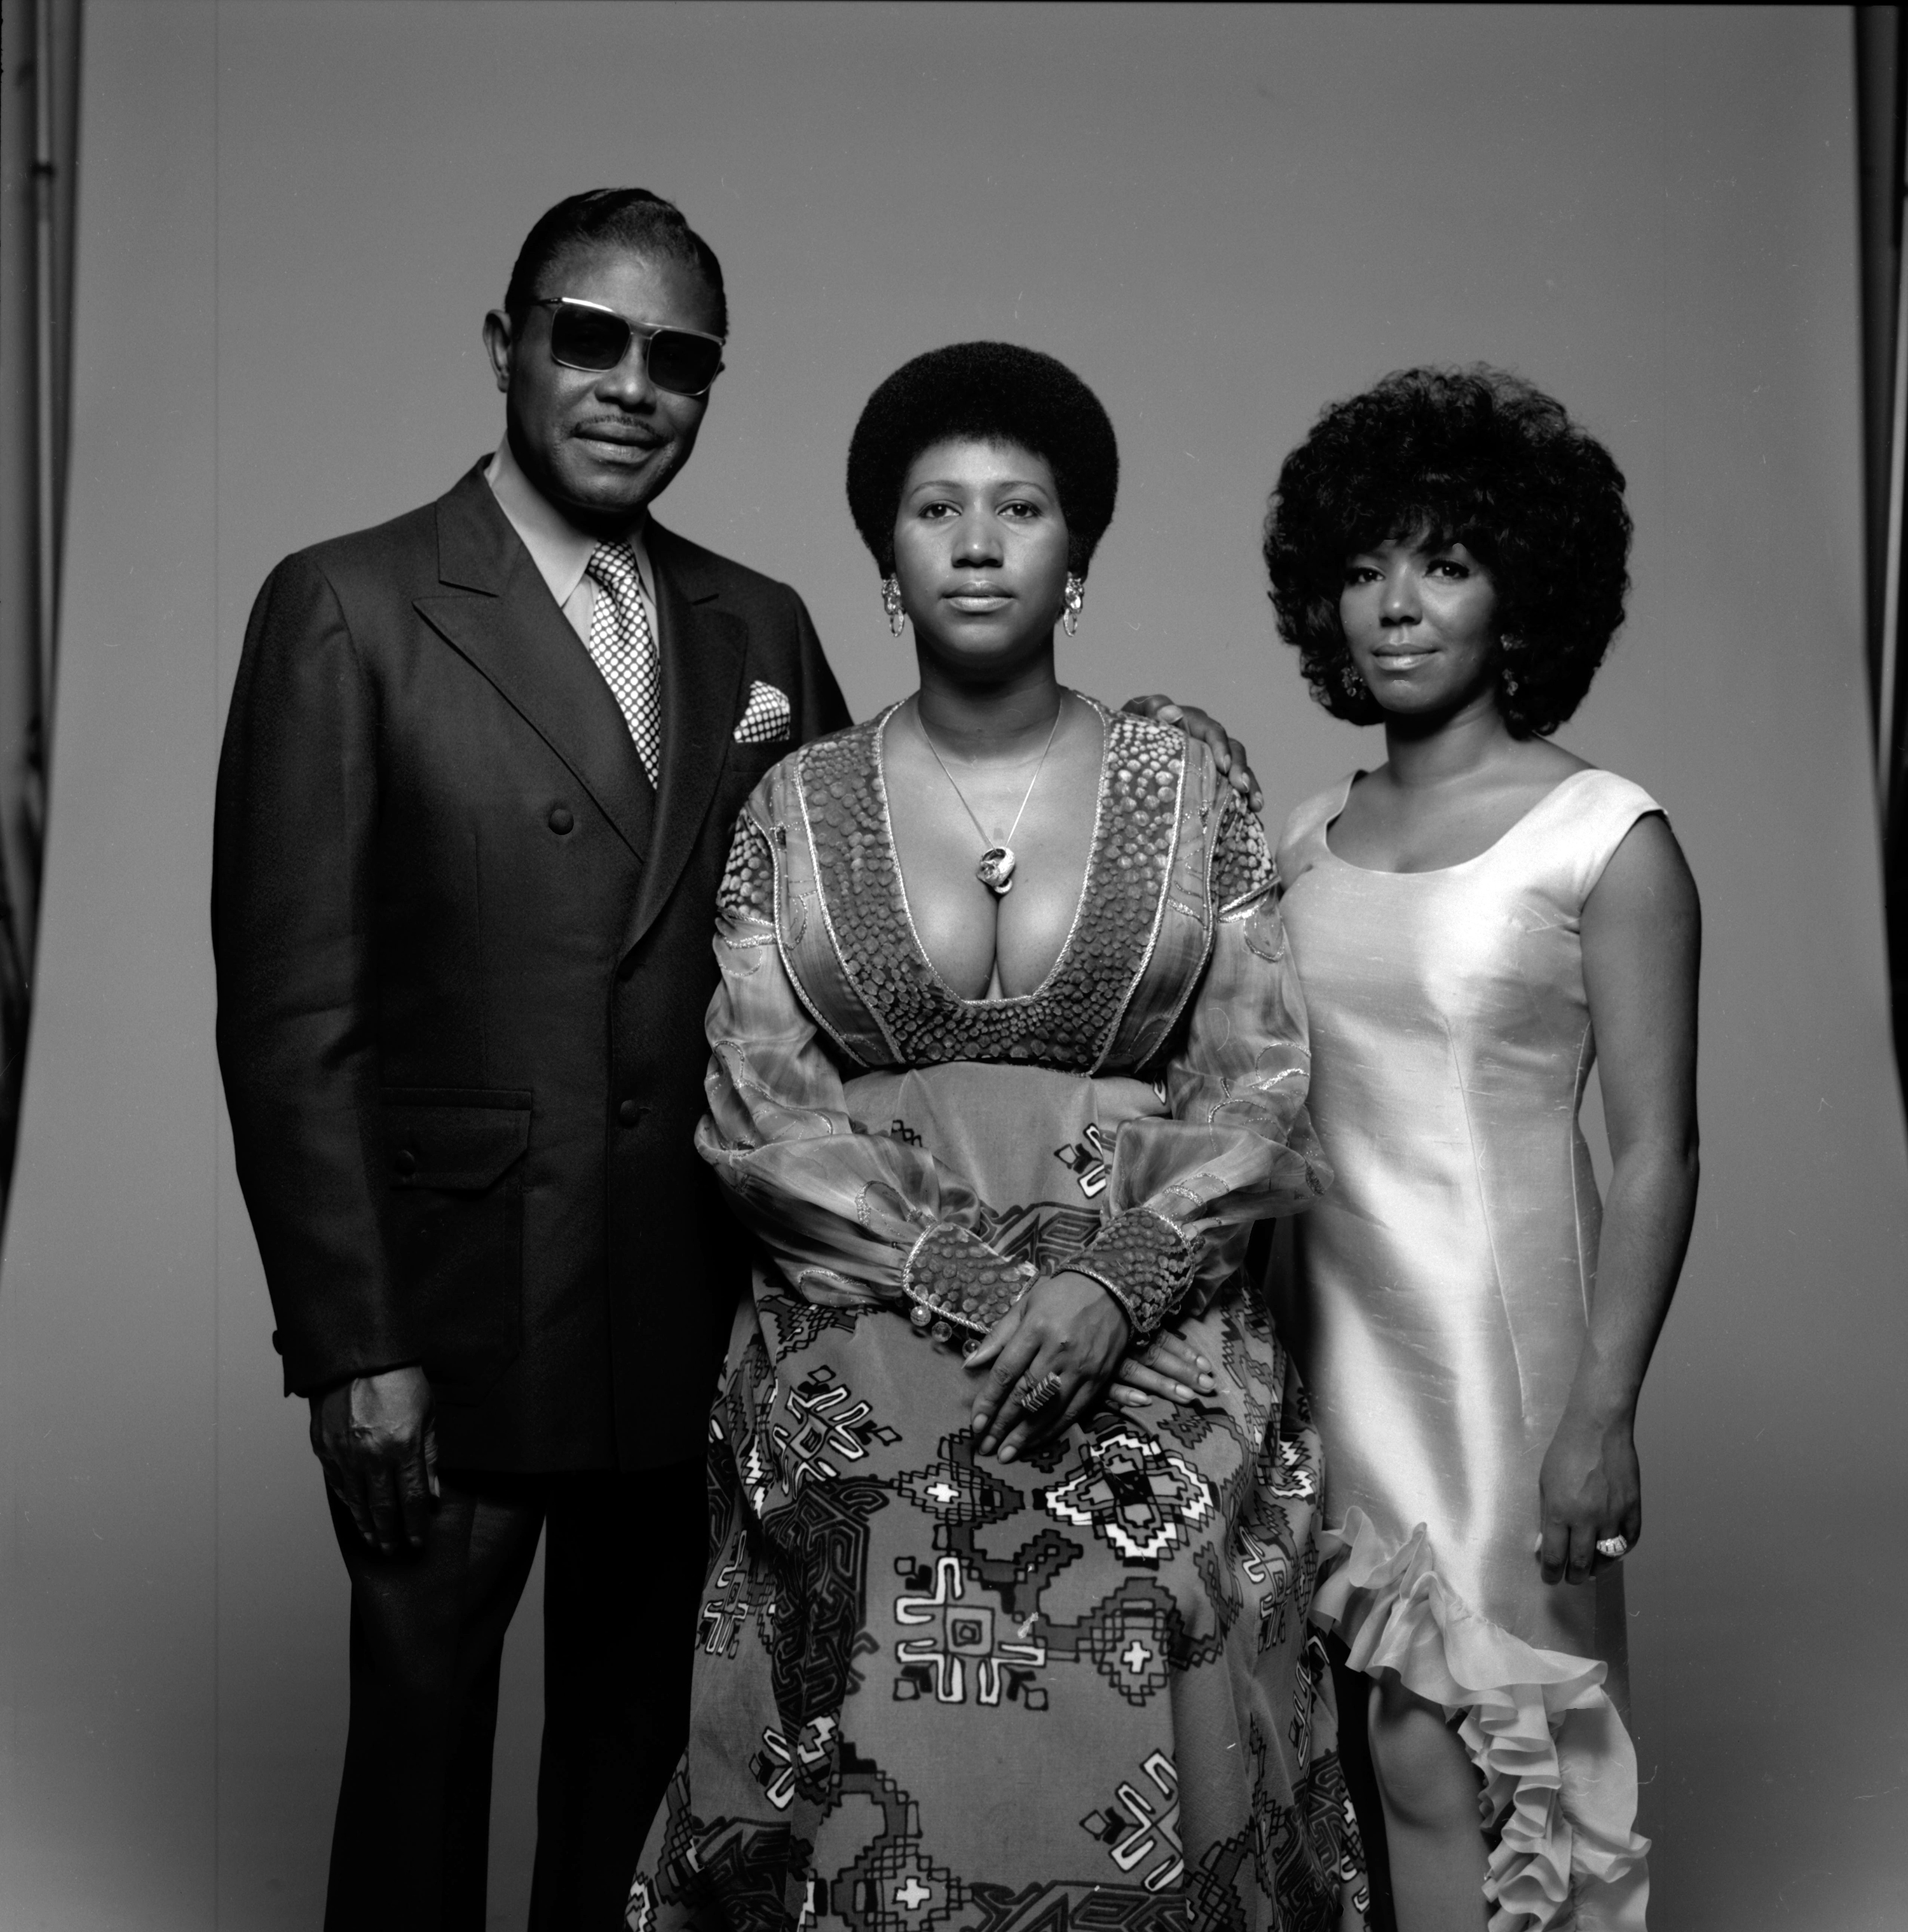 Aretha Franklin, center, her father, Reverend C. L. Franklin, and her sister, fellow singer Carolyn in New York, 1971. (Anthony Barboza—Getty Images)